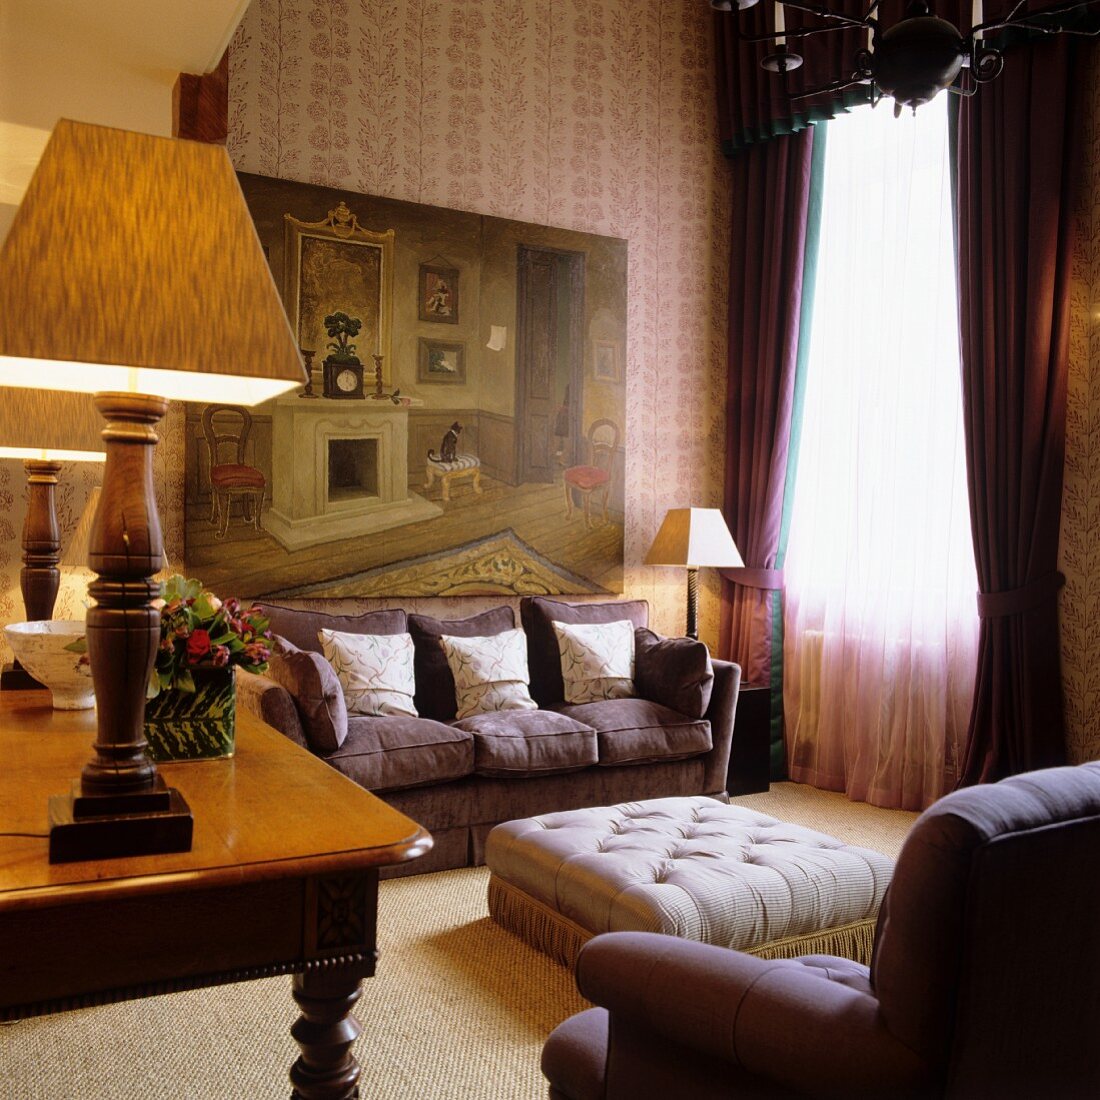 Grand salon with upholstered sofa and ottoman in front of window and table lamp on antique desk